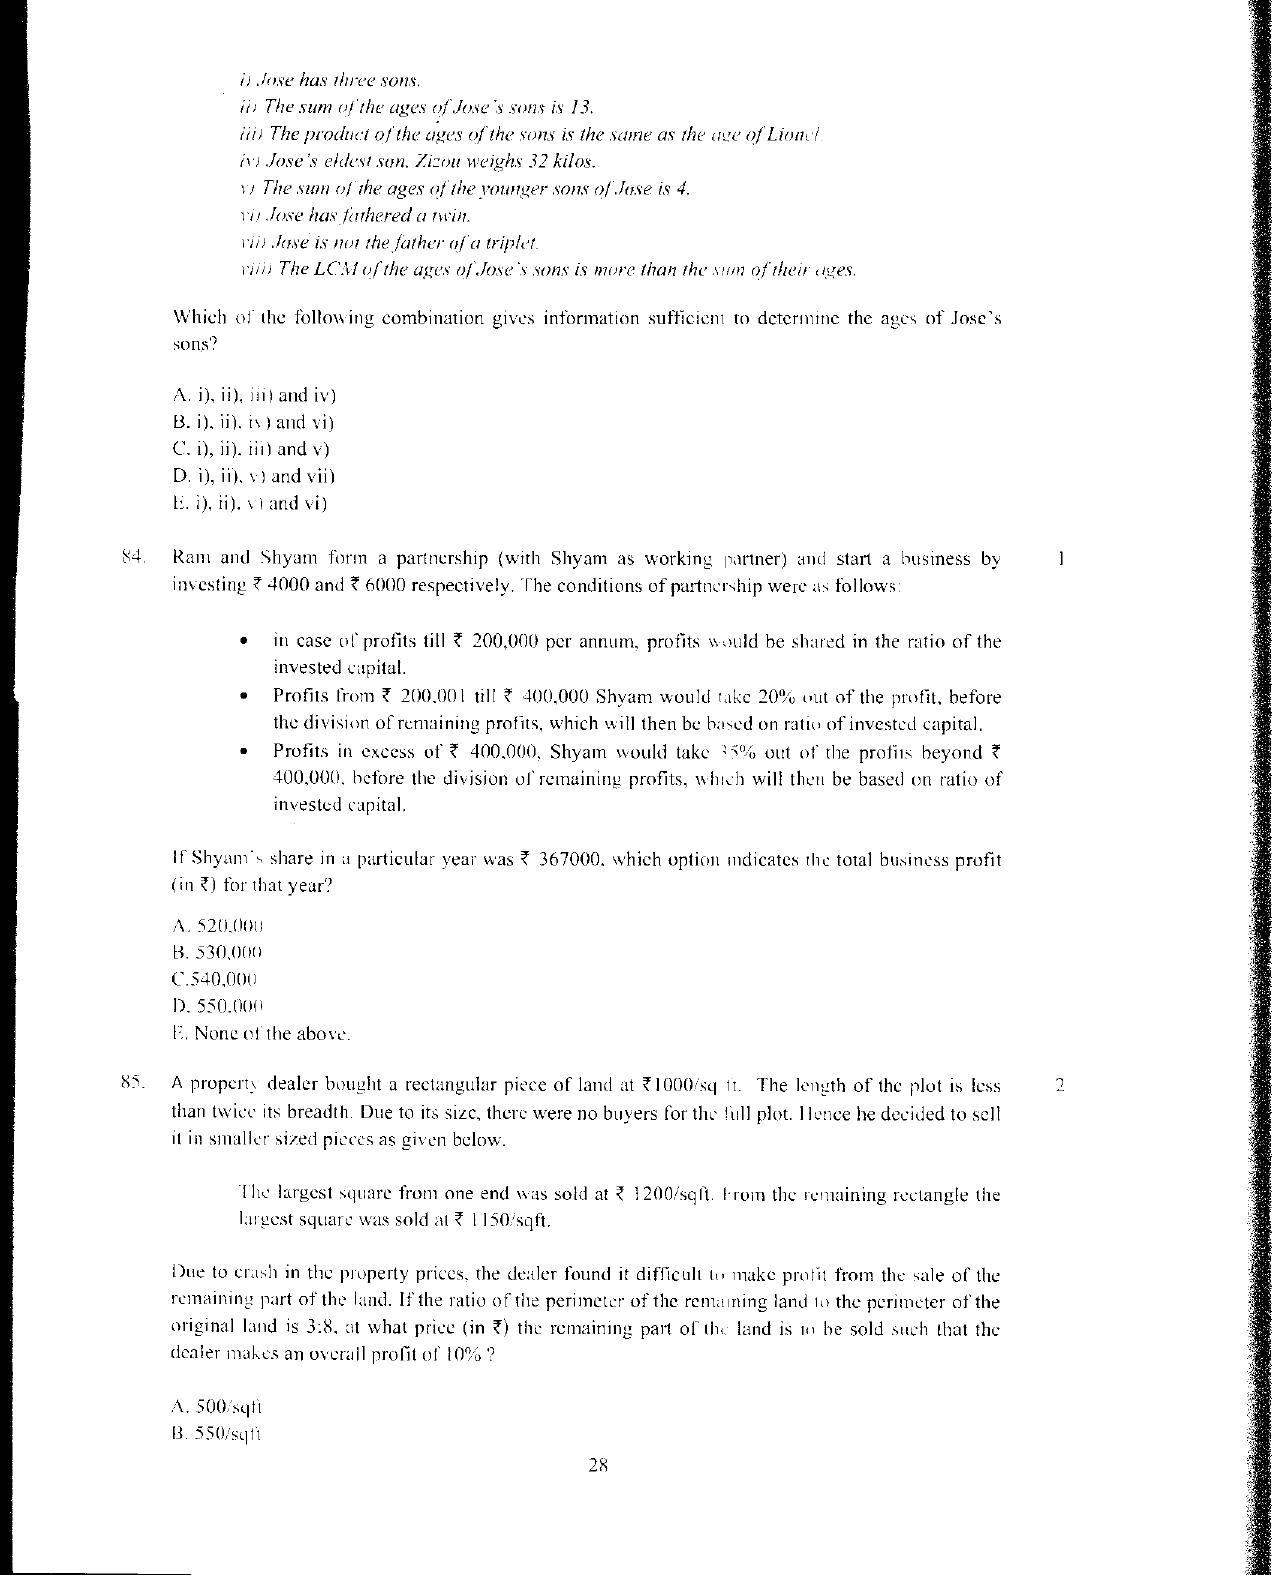 XAT 2012 Question Papers - Page 29